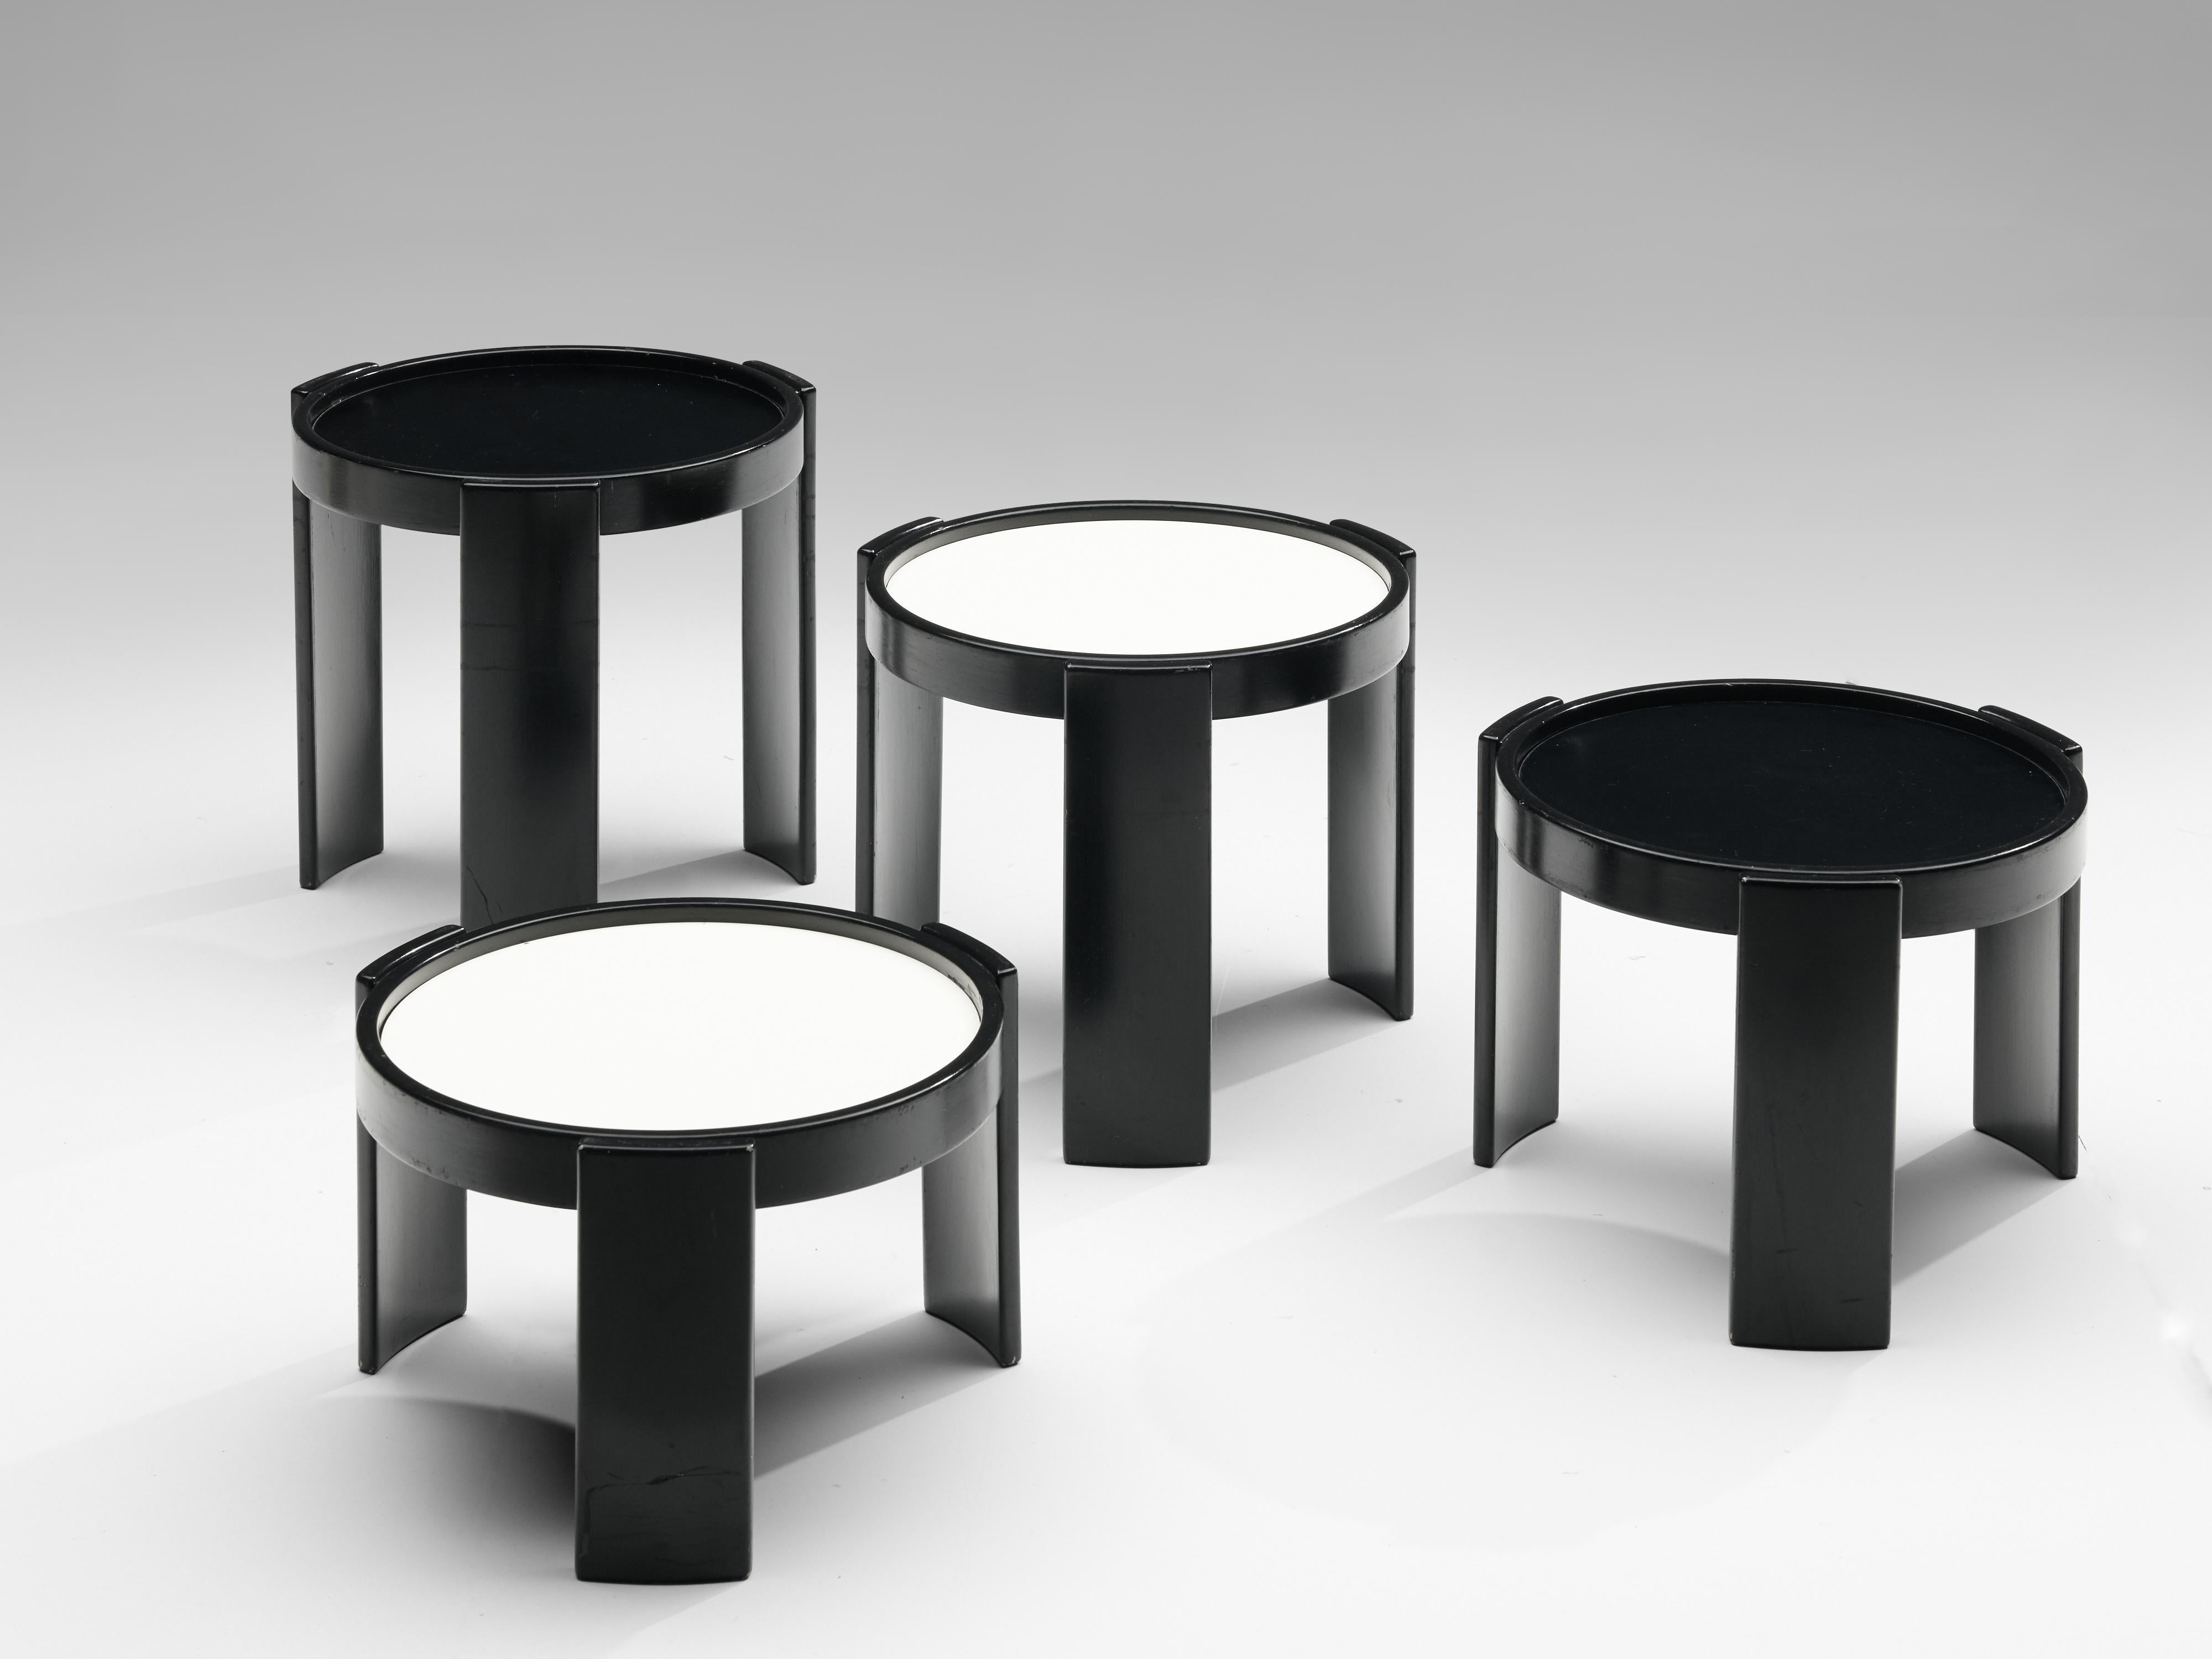 Gianfranco Frattini for Cassina, nesting tables model '780', black and white lacquered wood, Italy, 1960s

A set of four nesting tables, designed by Gianfranco Frattini for Cassina. All the tables embody a black lacquered wooden frame with a